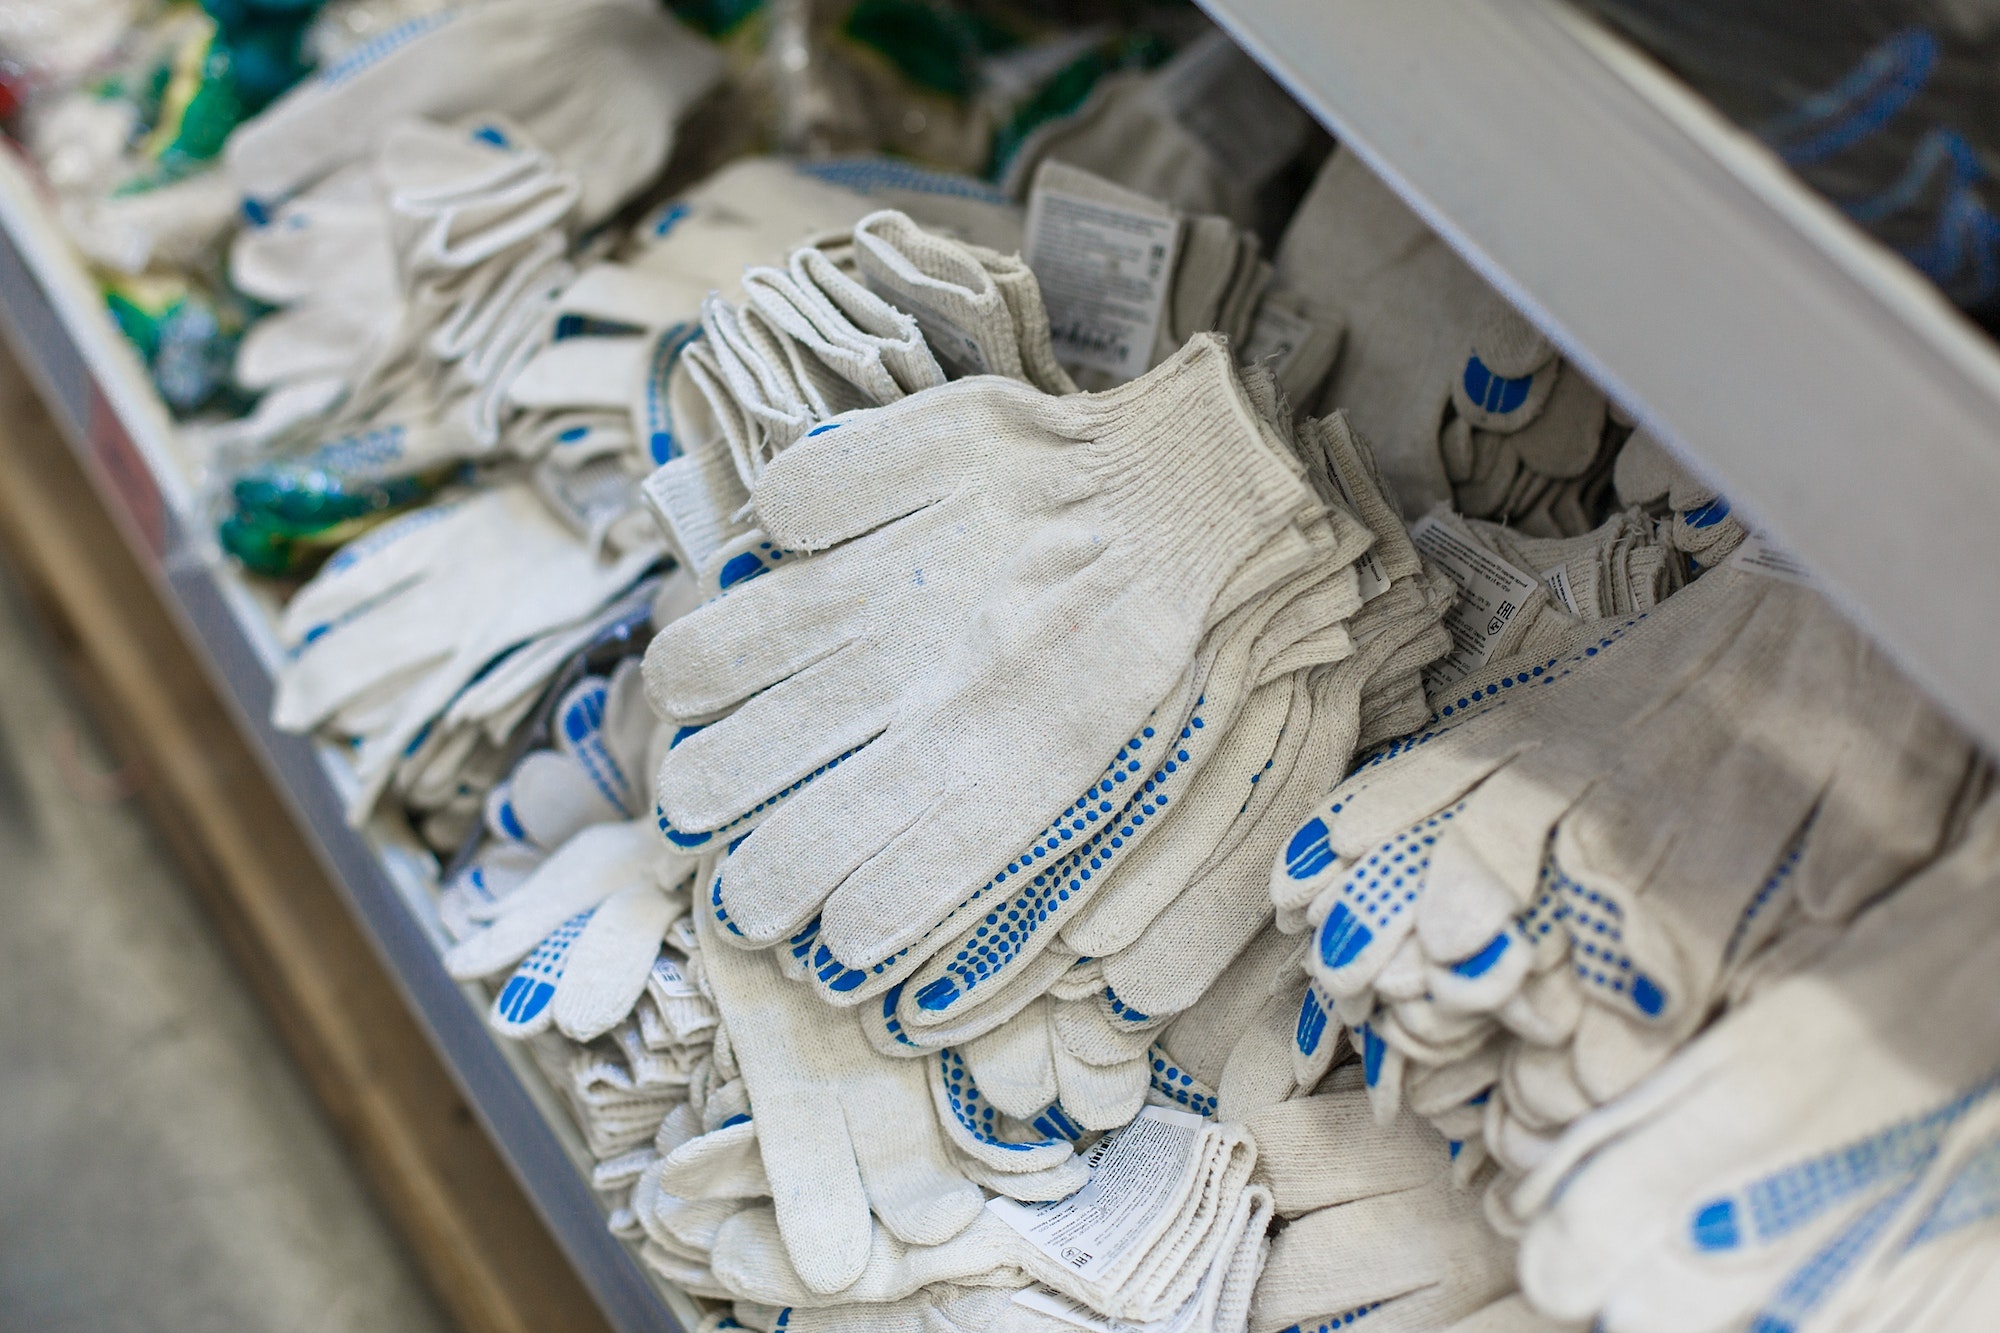 Working Protective gloves. A man in a hardware store buys gloves.